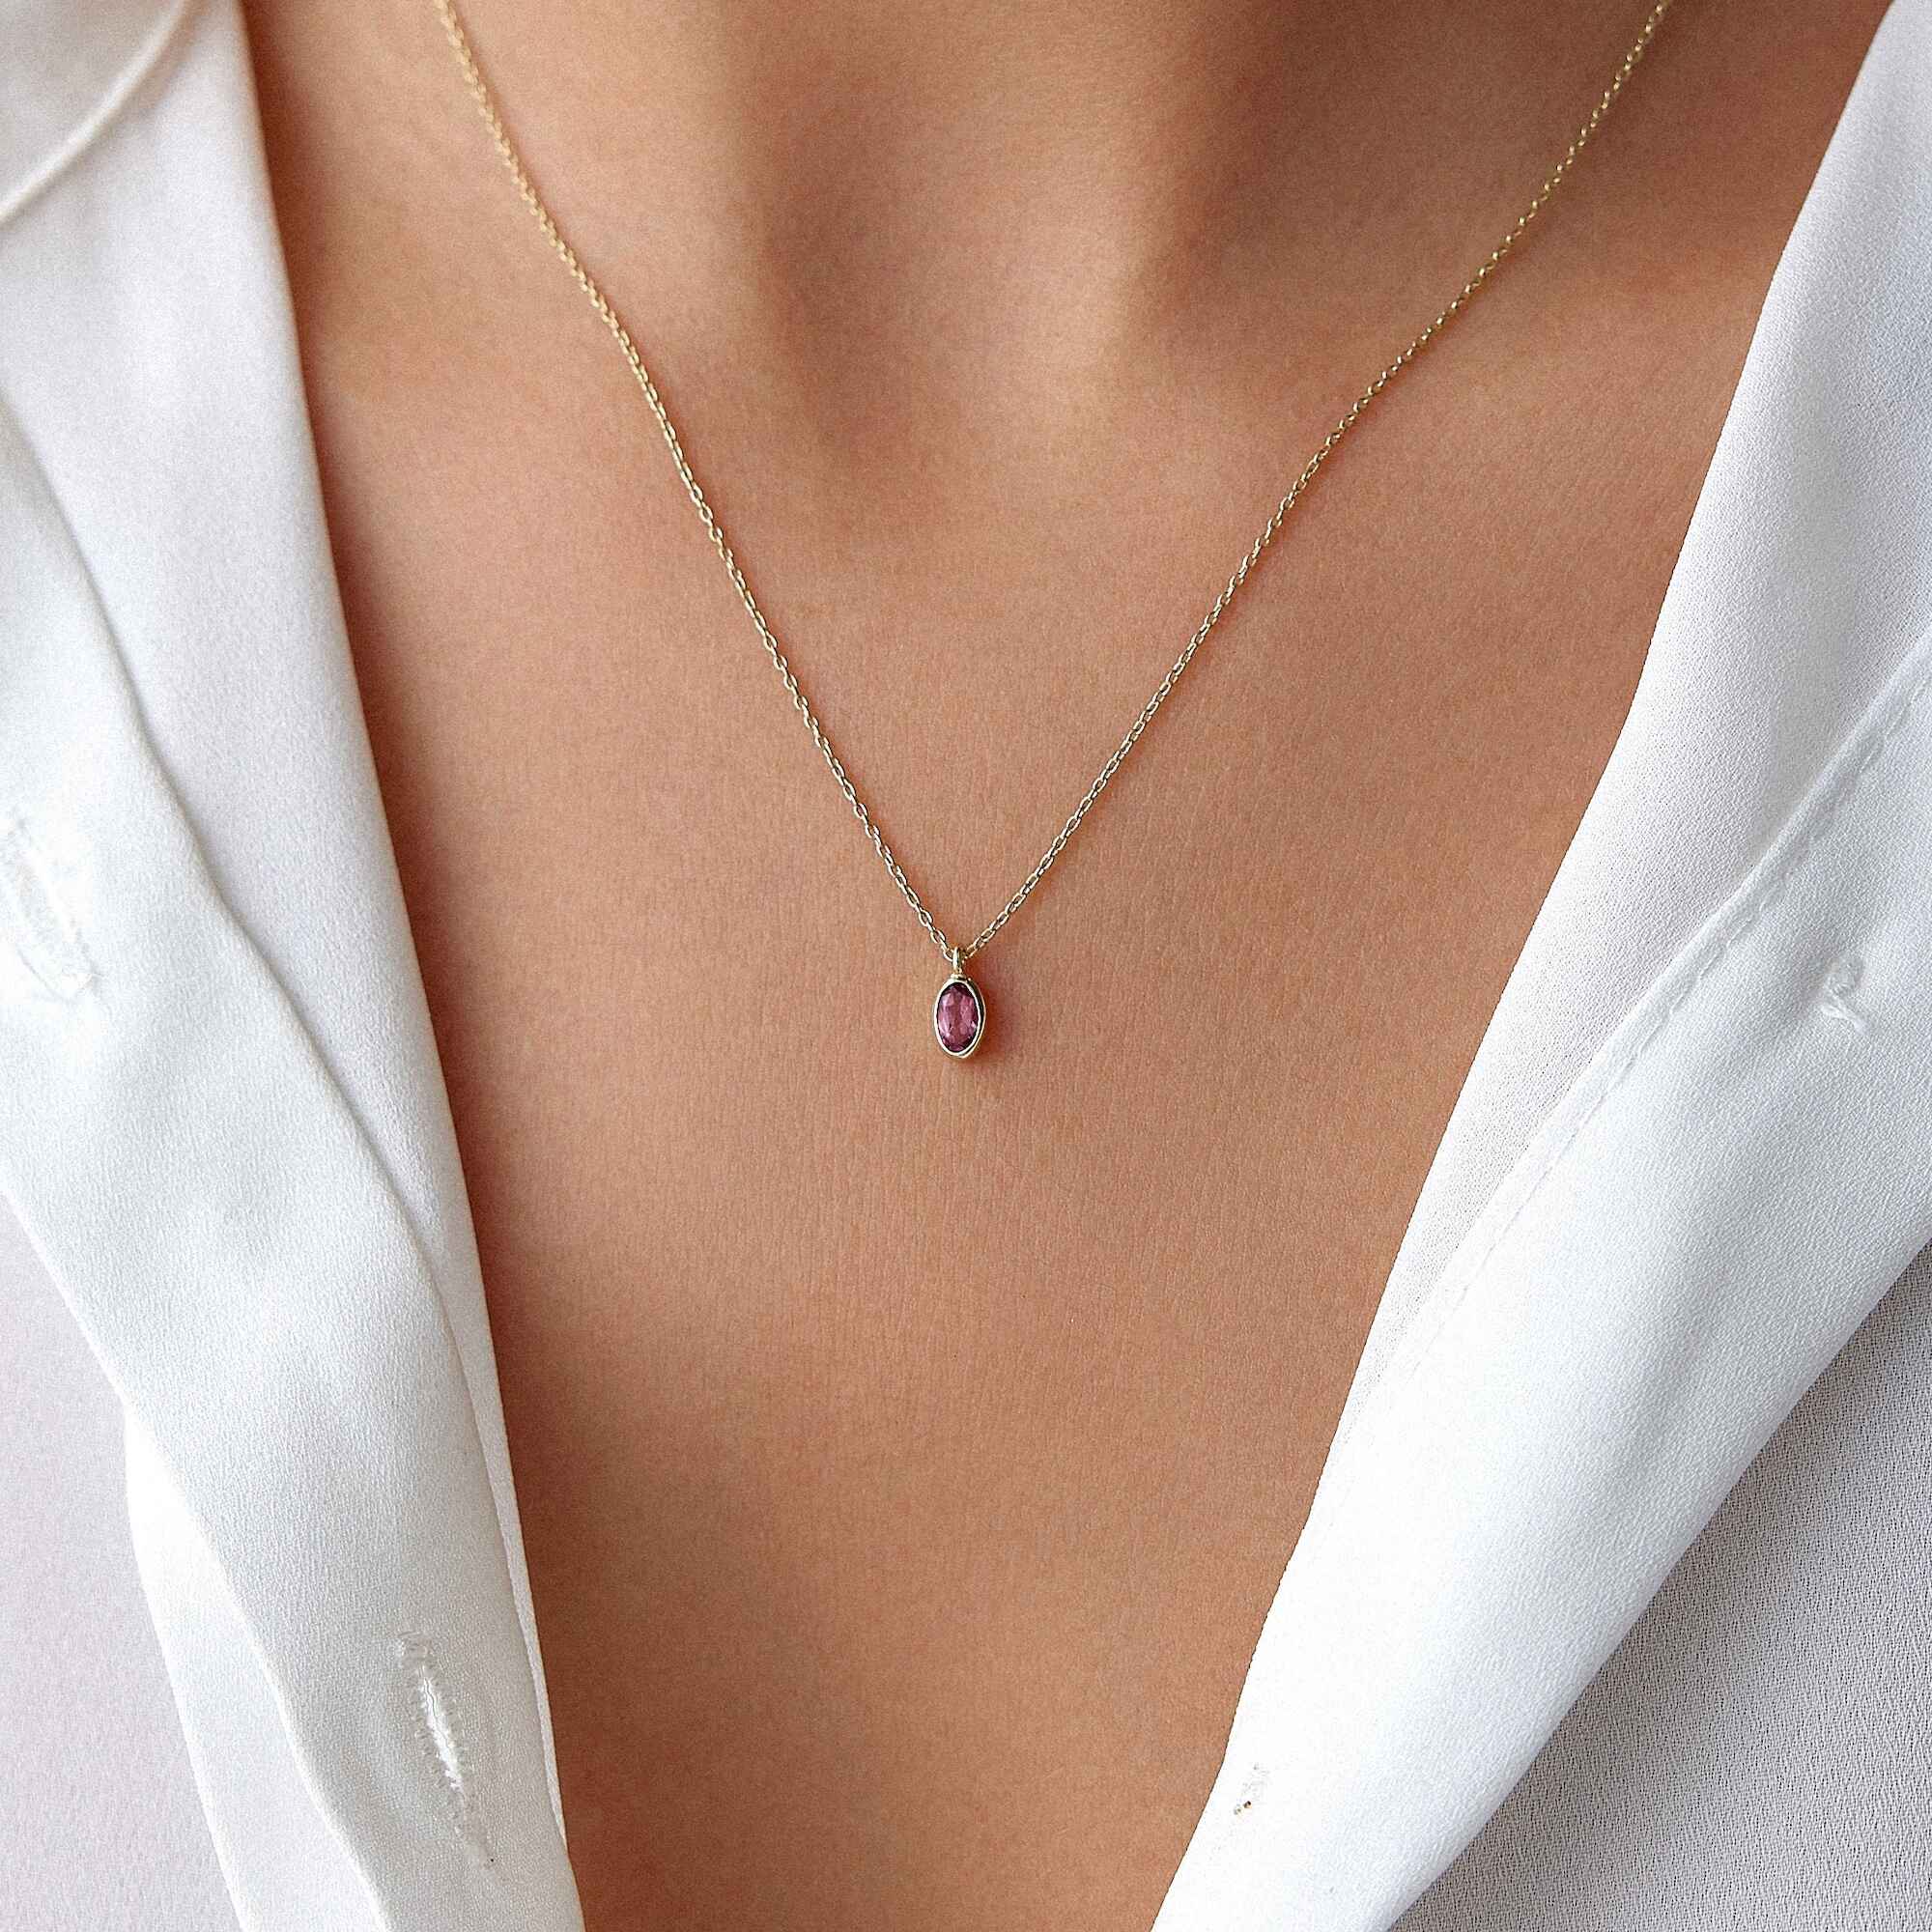 Oval Cut Pink Tourmaline Solitaire Necklace Available in 14K and 18K Gold